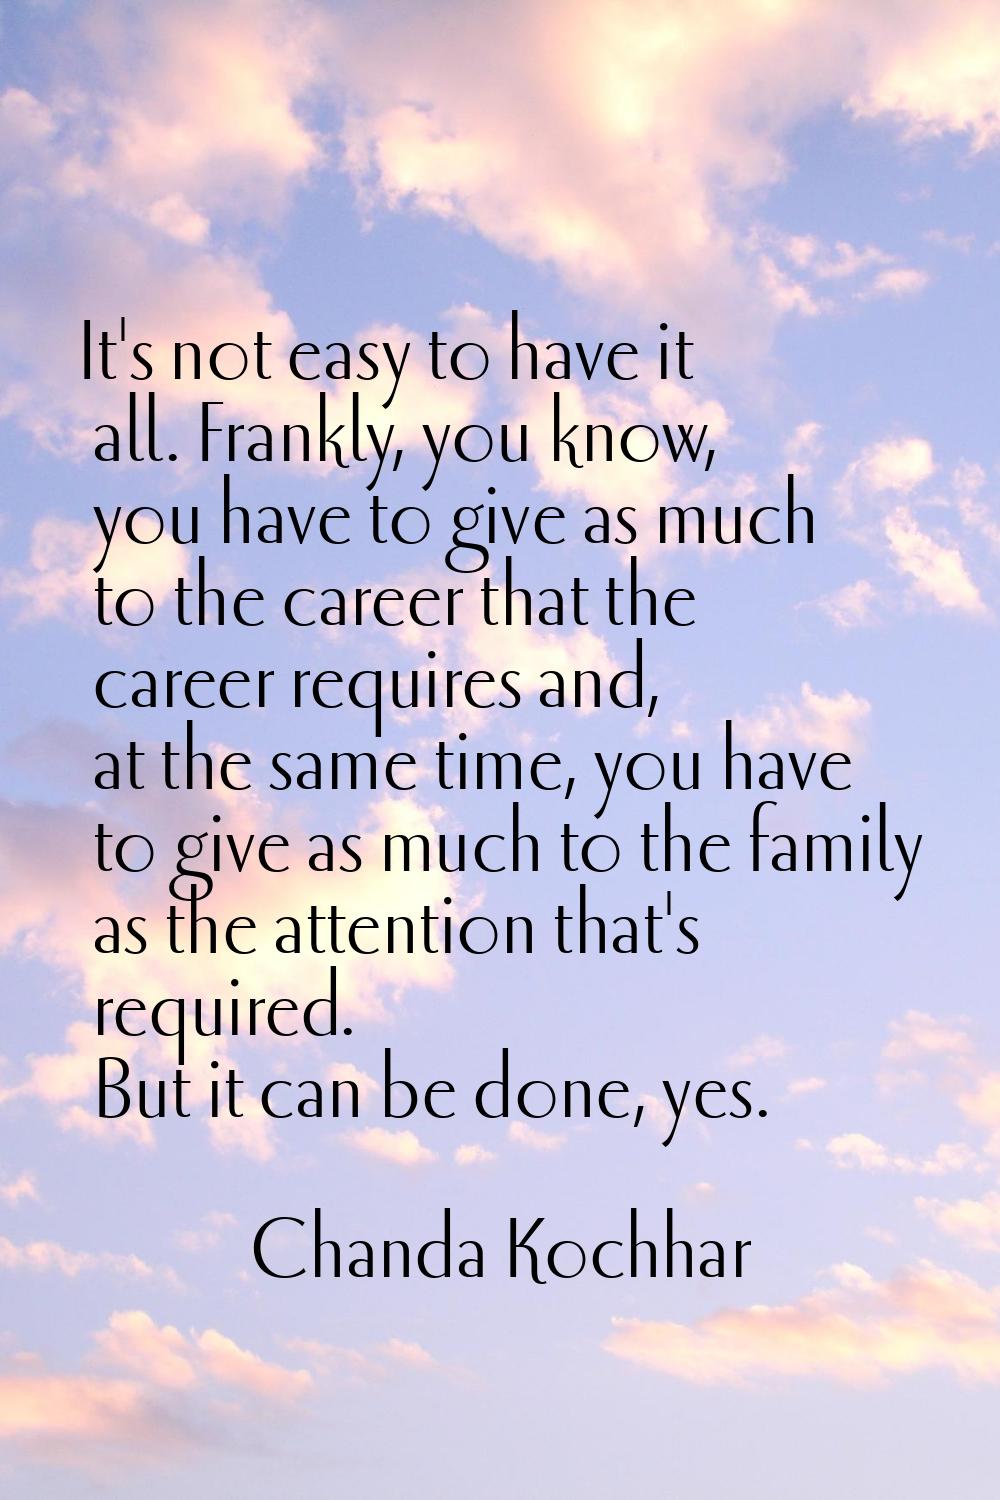 It's not easy to have it all. Frankly, you know, you have to give as much to the career that the ca